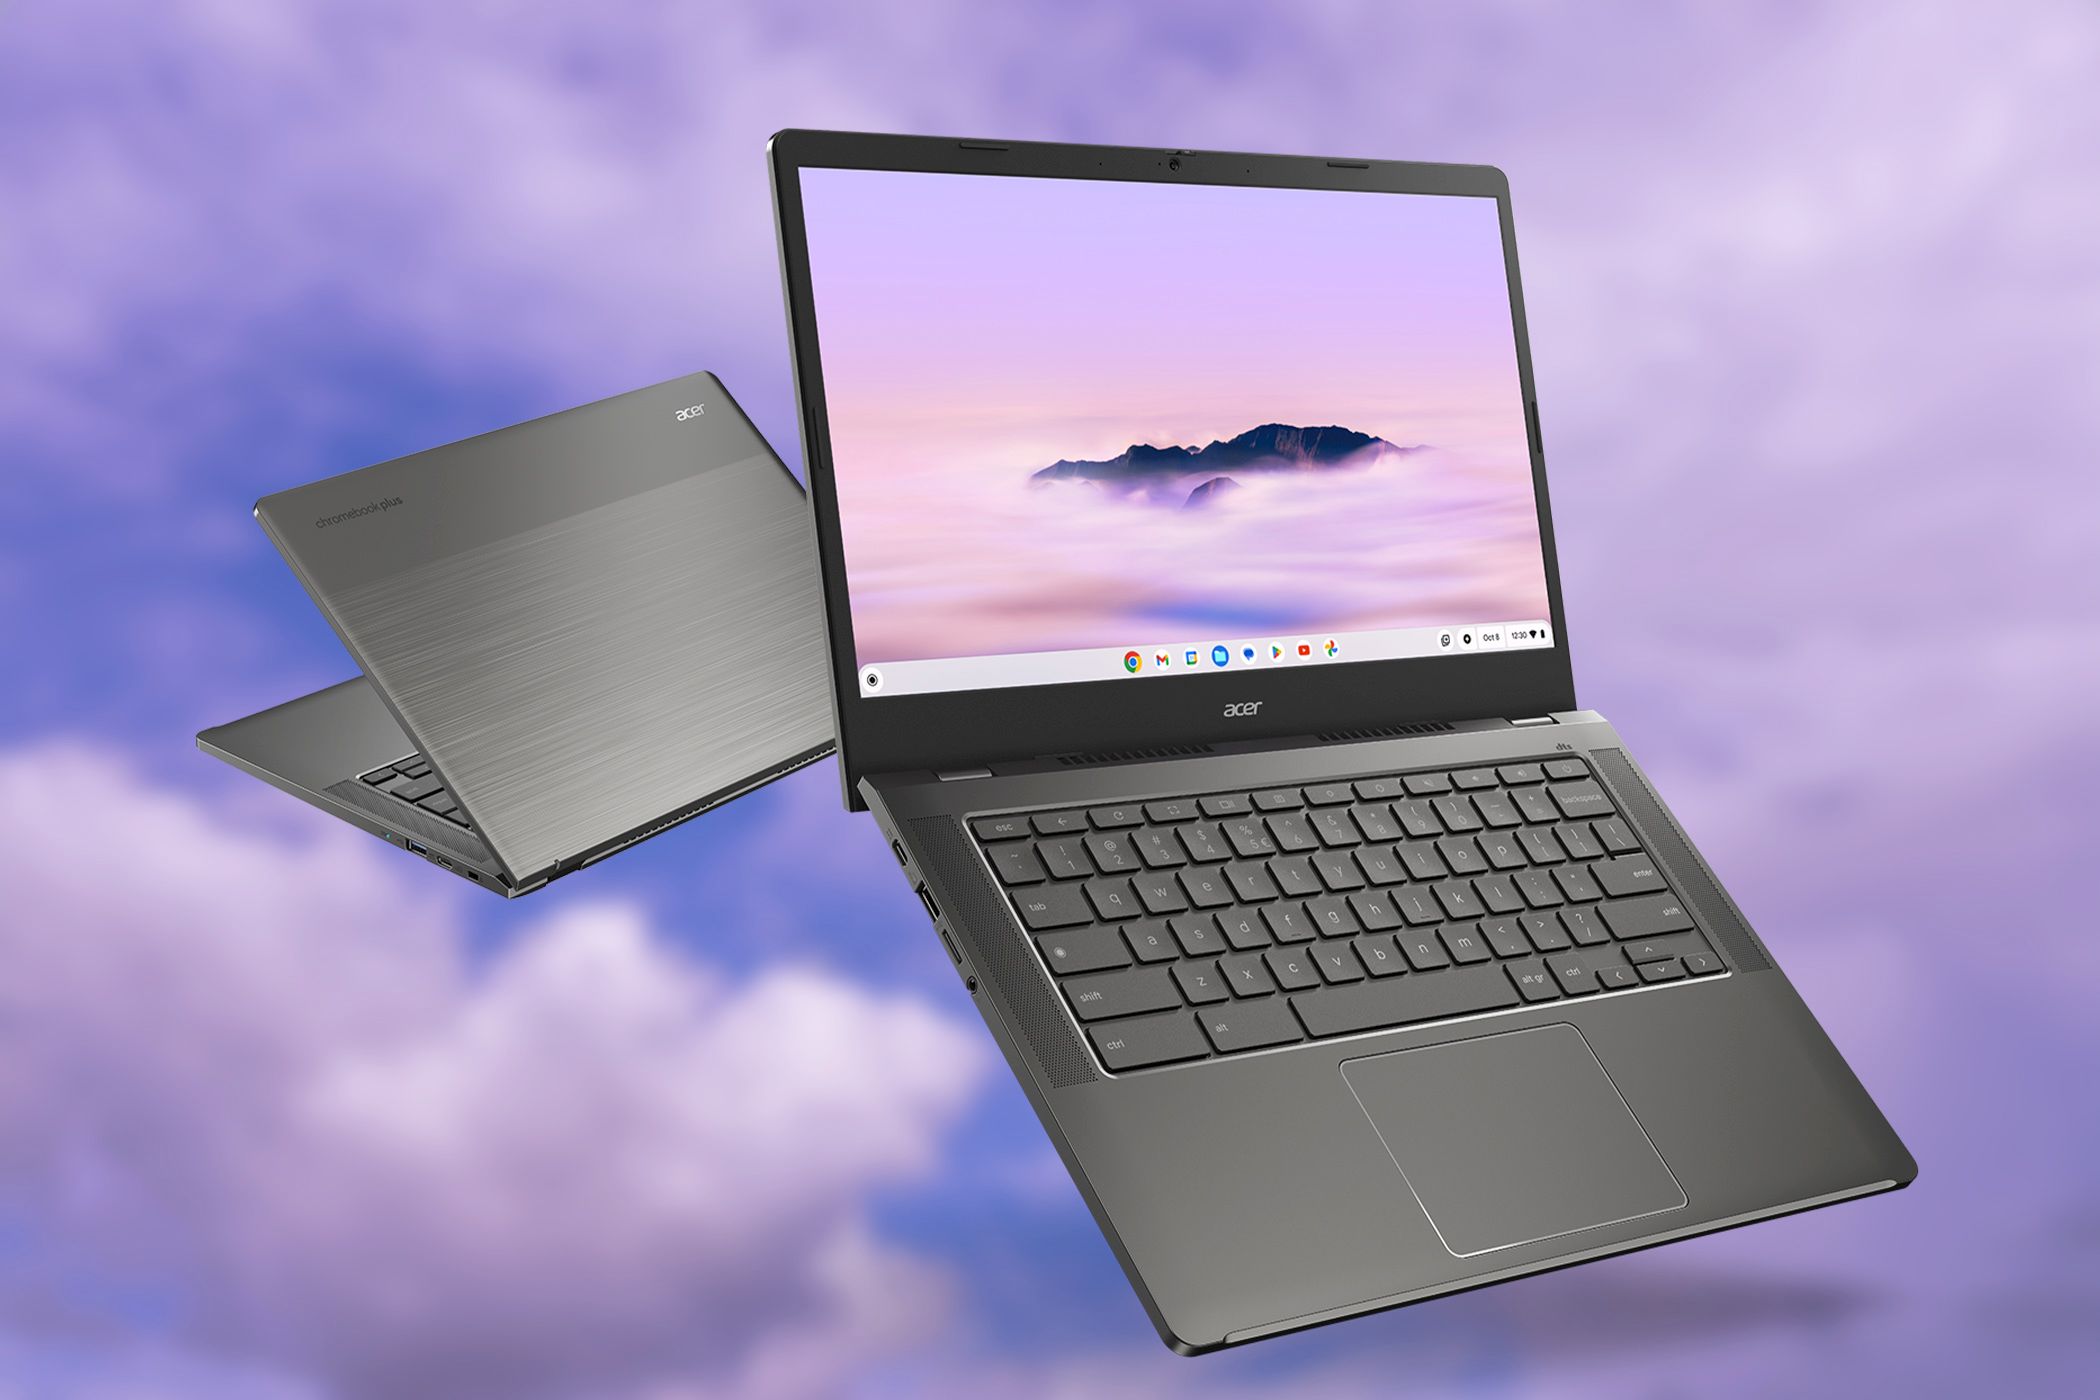 Acer’s New Chromebook Has Everything I Look for in an Affordable Laptop